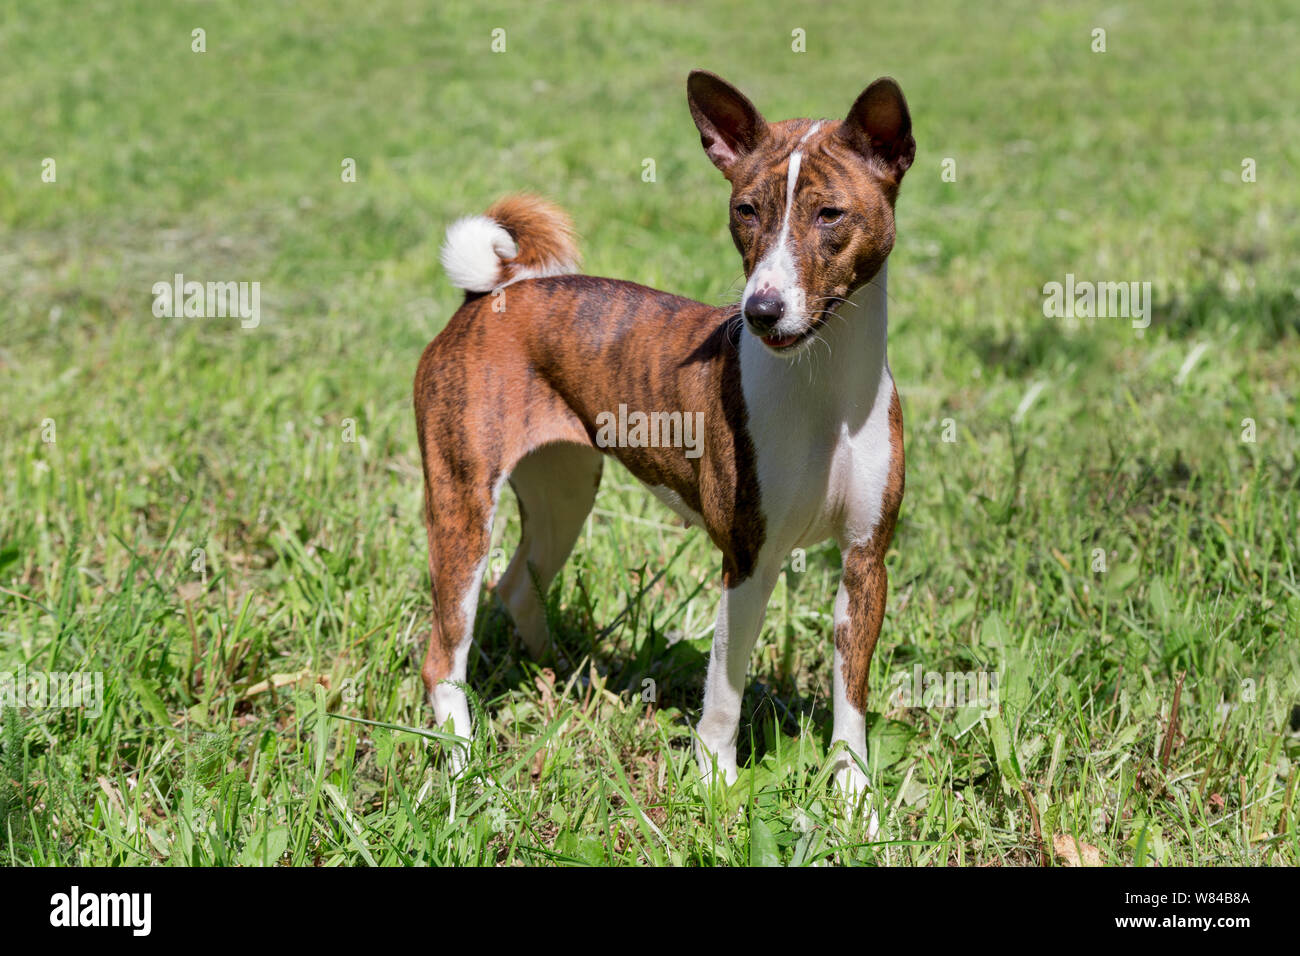 Cute brindle basenji puppy is standing on a green grass. Pet animals. Purebred dog. Stock Photo